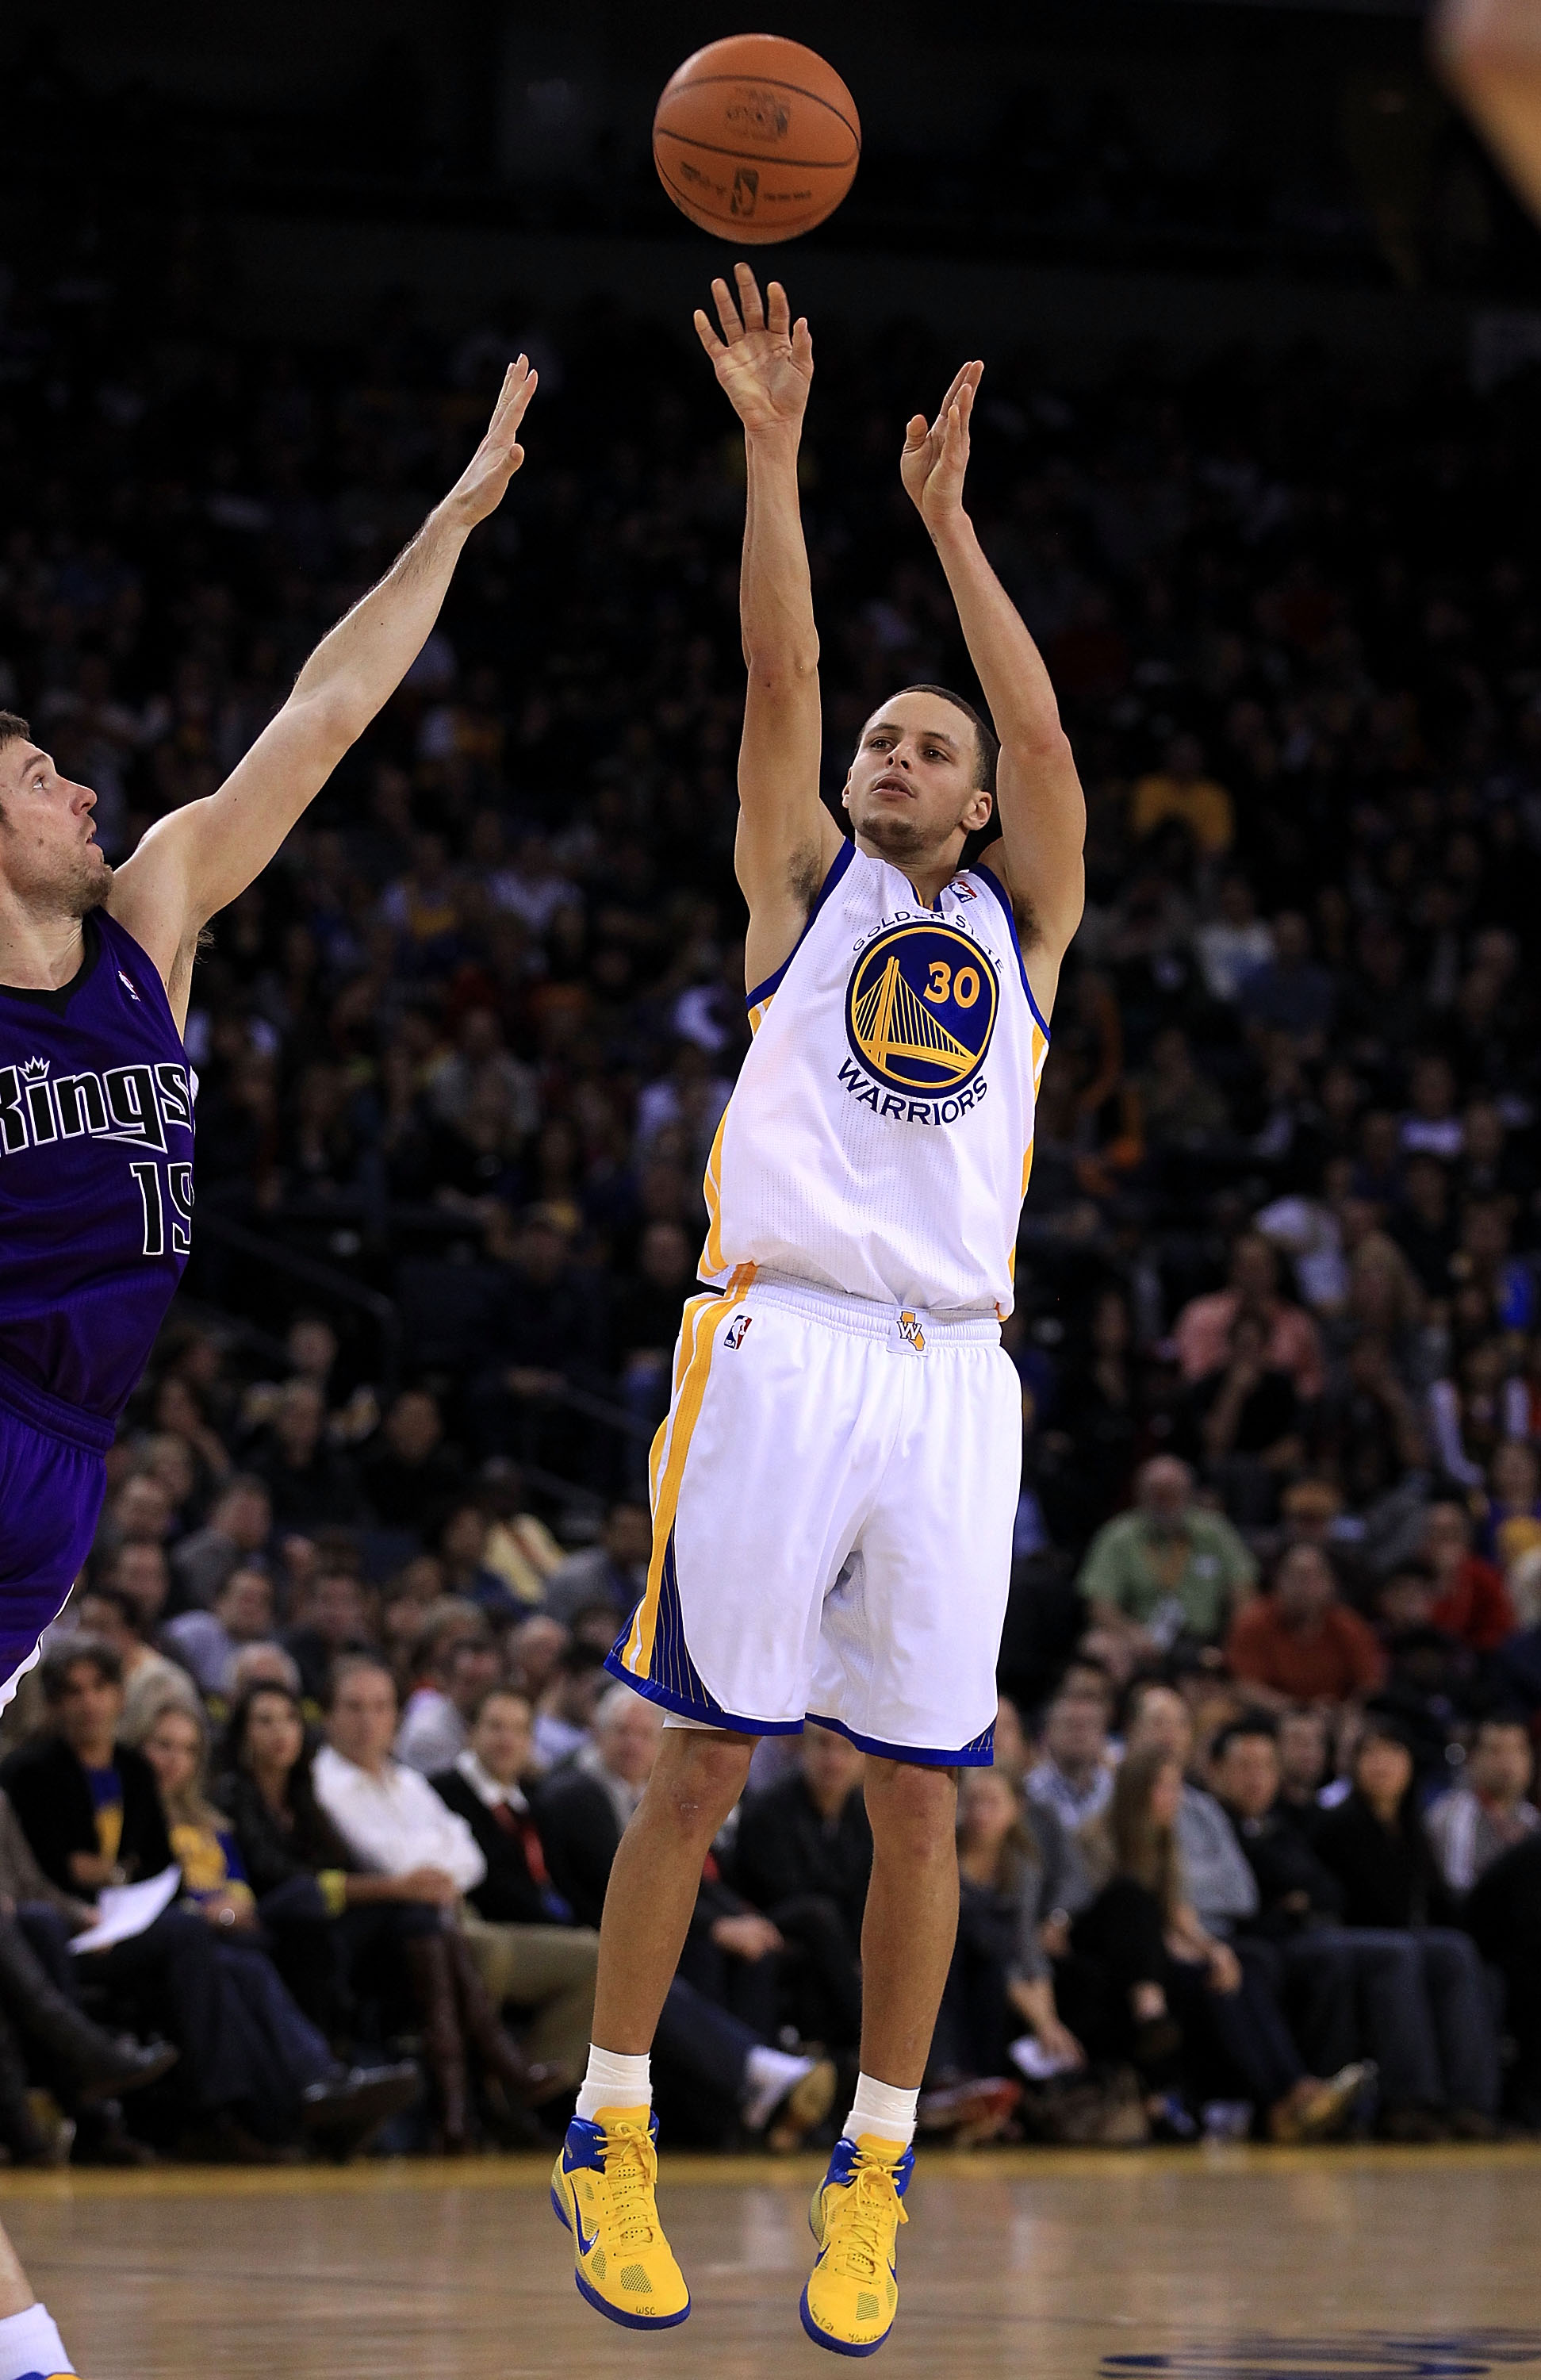 OAKLAND, CA - JANUARY 21:  Stephen Curry #30 of the Golden State Warriors shoots the ball during their game against the Sacramento Kings at Oracle Arena on January 21, 2011 in Oakland, California. NOTE TO USER: User expressly acknowledges and agrees that,